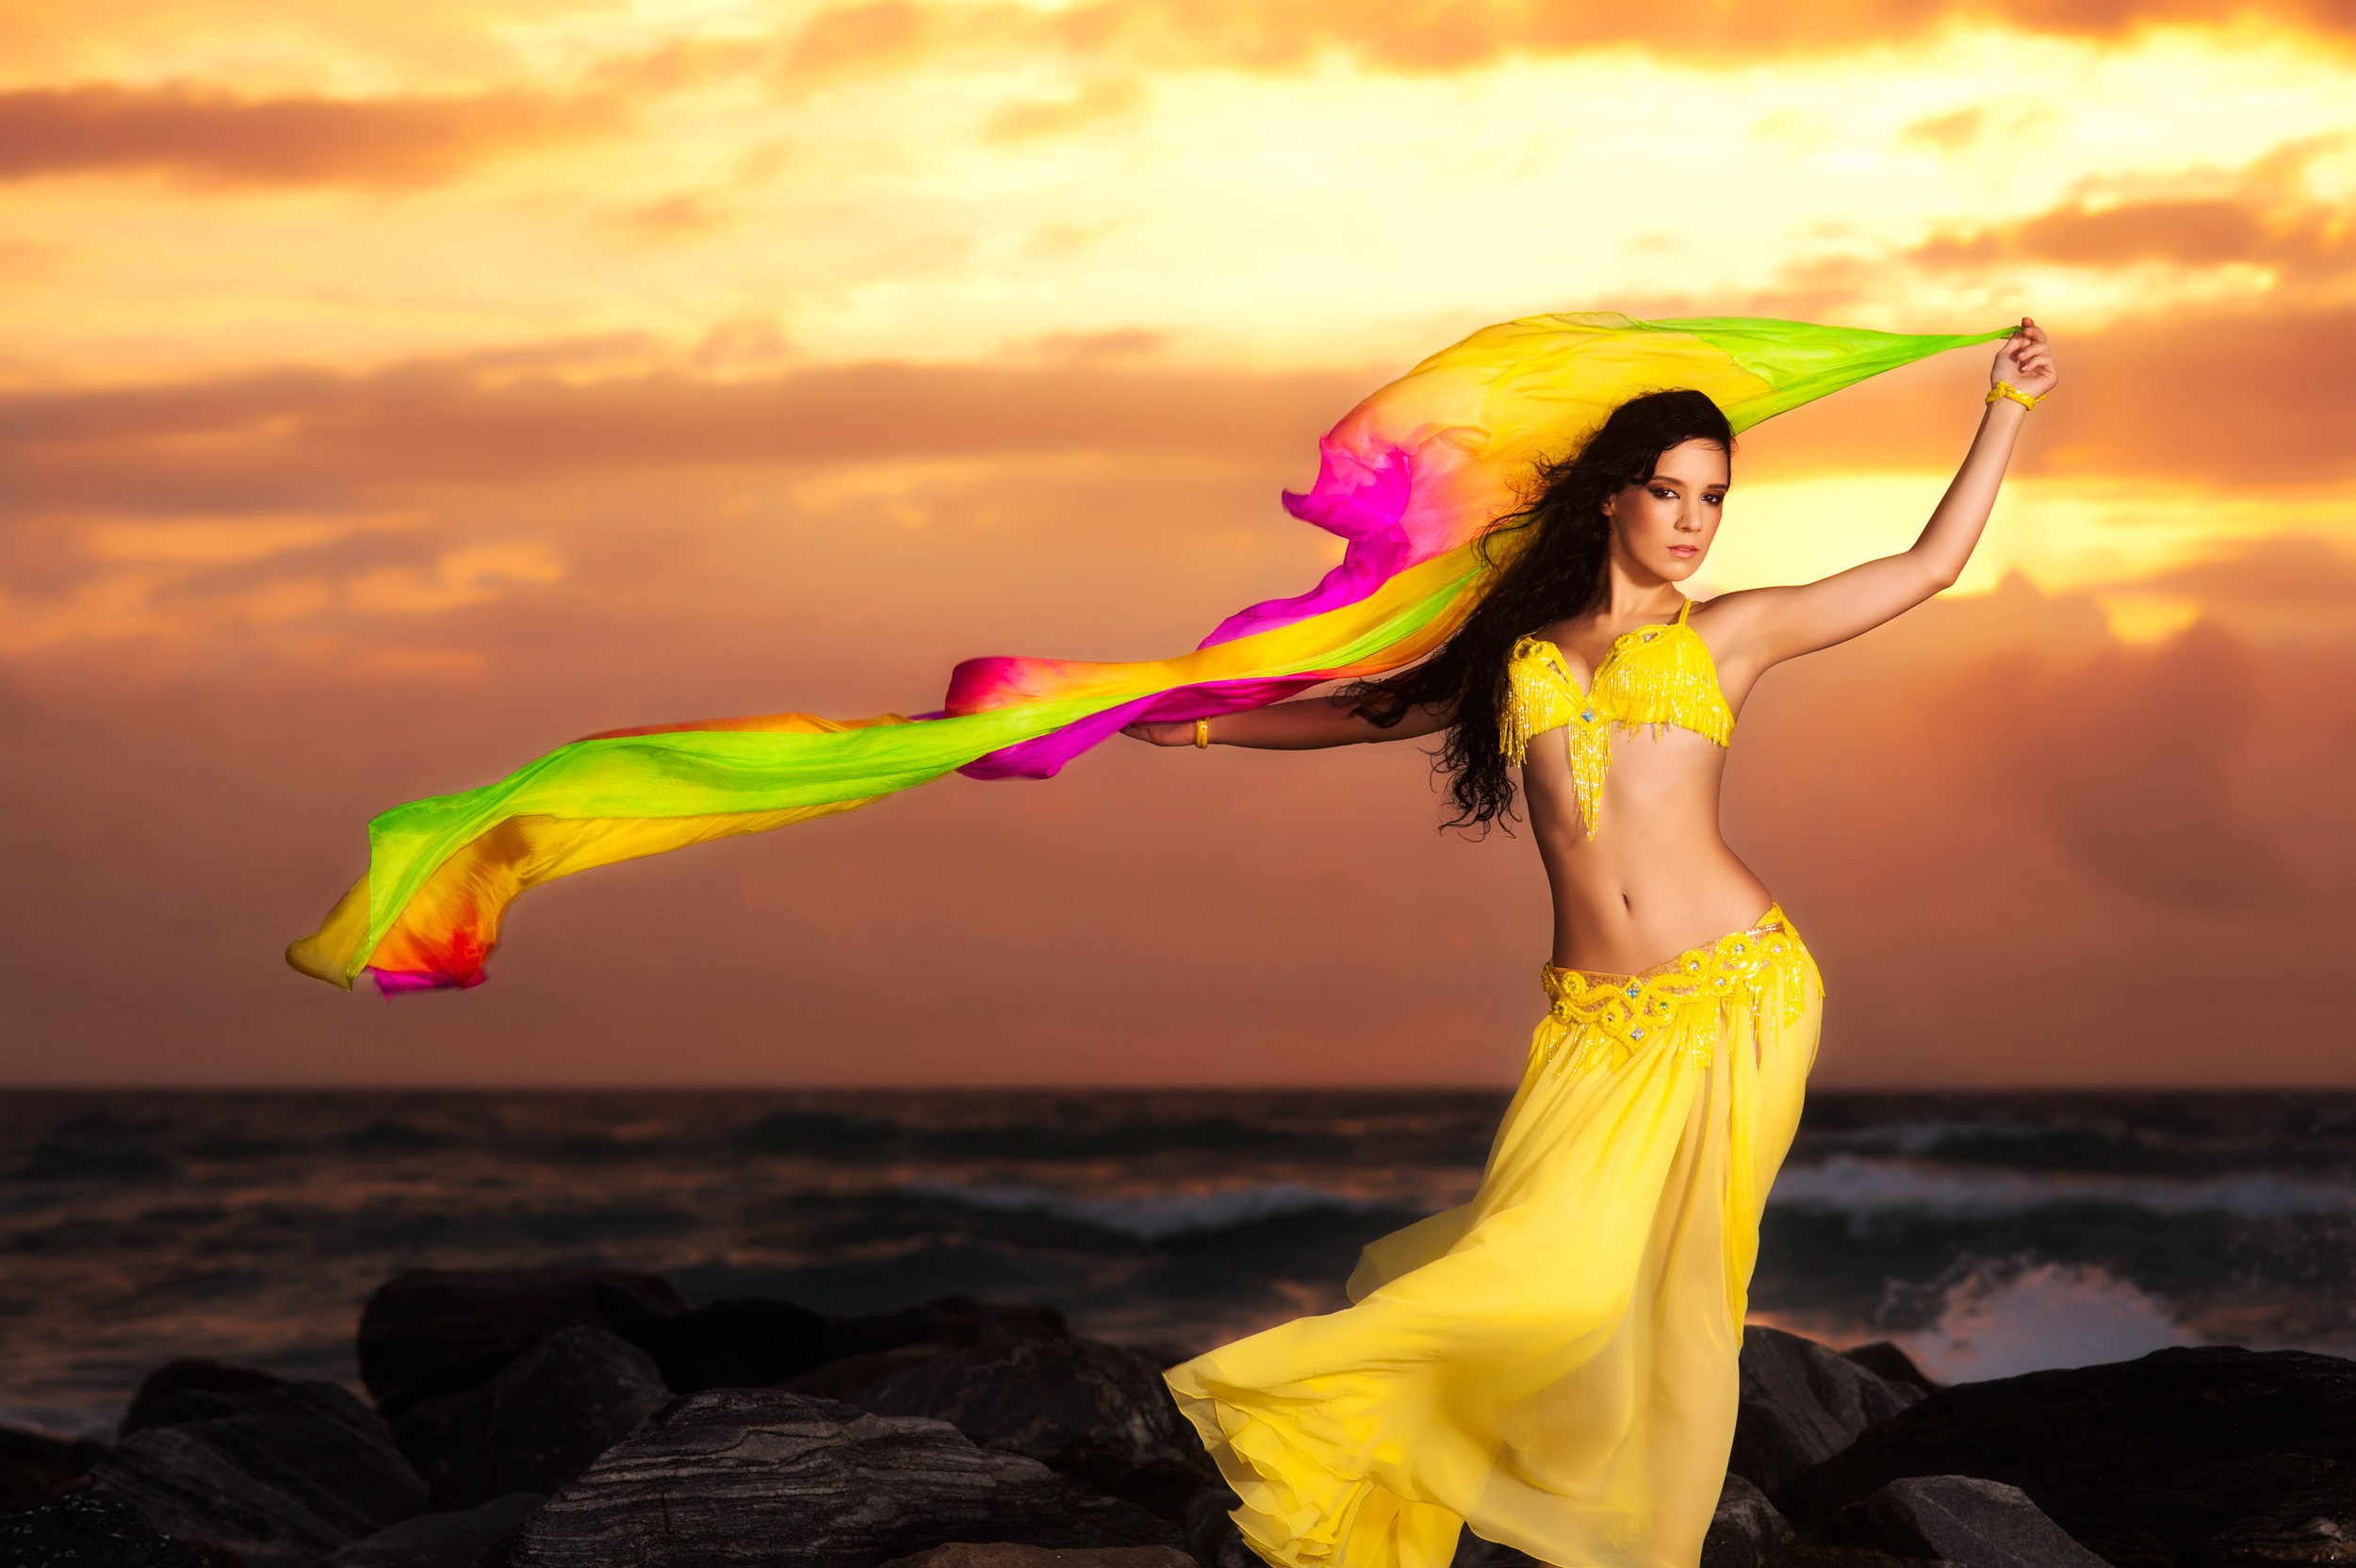  cheeky belly dancer provides belly dance, fire dance, indian, bollywood,
 Turkish and egyptain belly dance style for weddings, parties, classes 
and lessons serving jupiter palm beach gardens west palm beach palm 
beach delray beach boynton beach fo